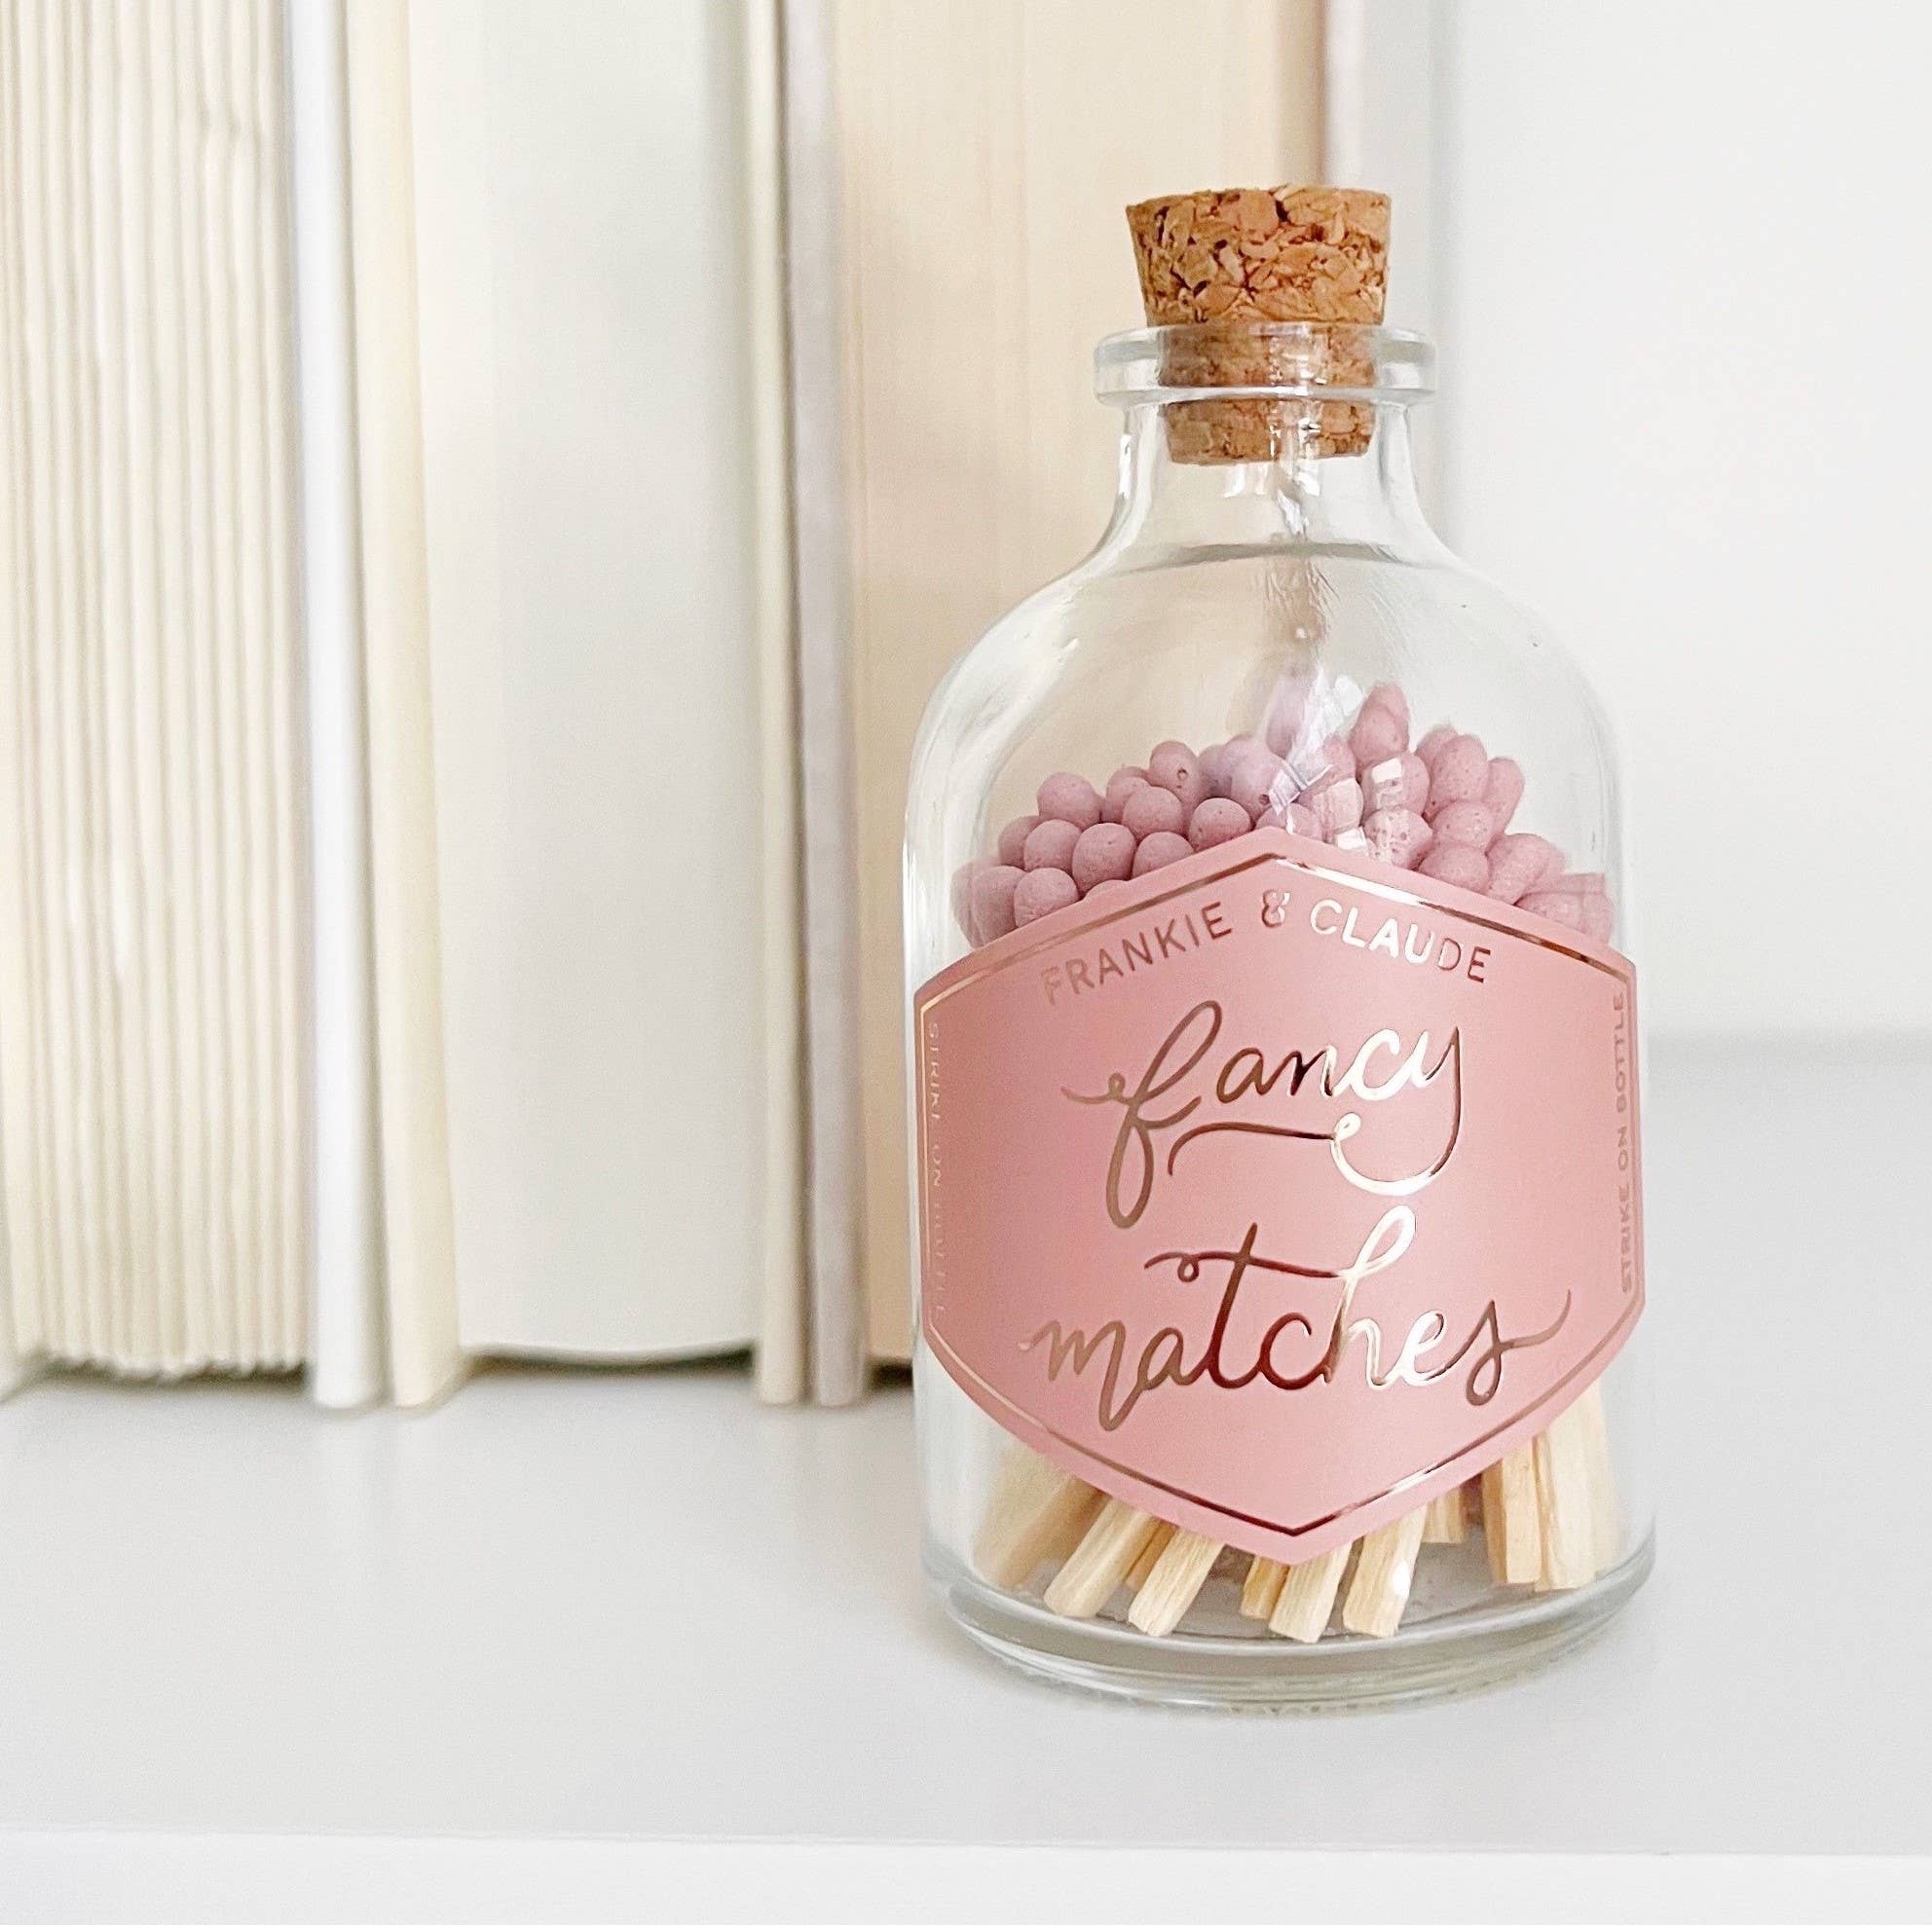 Frankie & Claude - Fancy Matches: Dusty Rose Small Match Jar